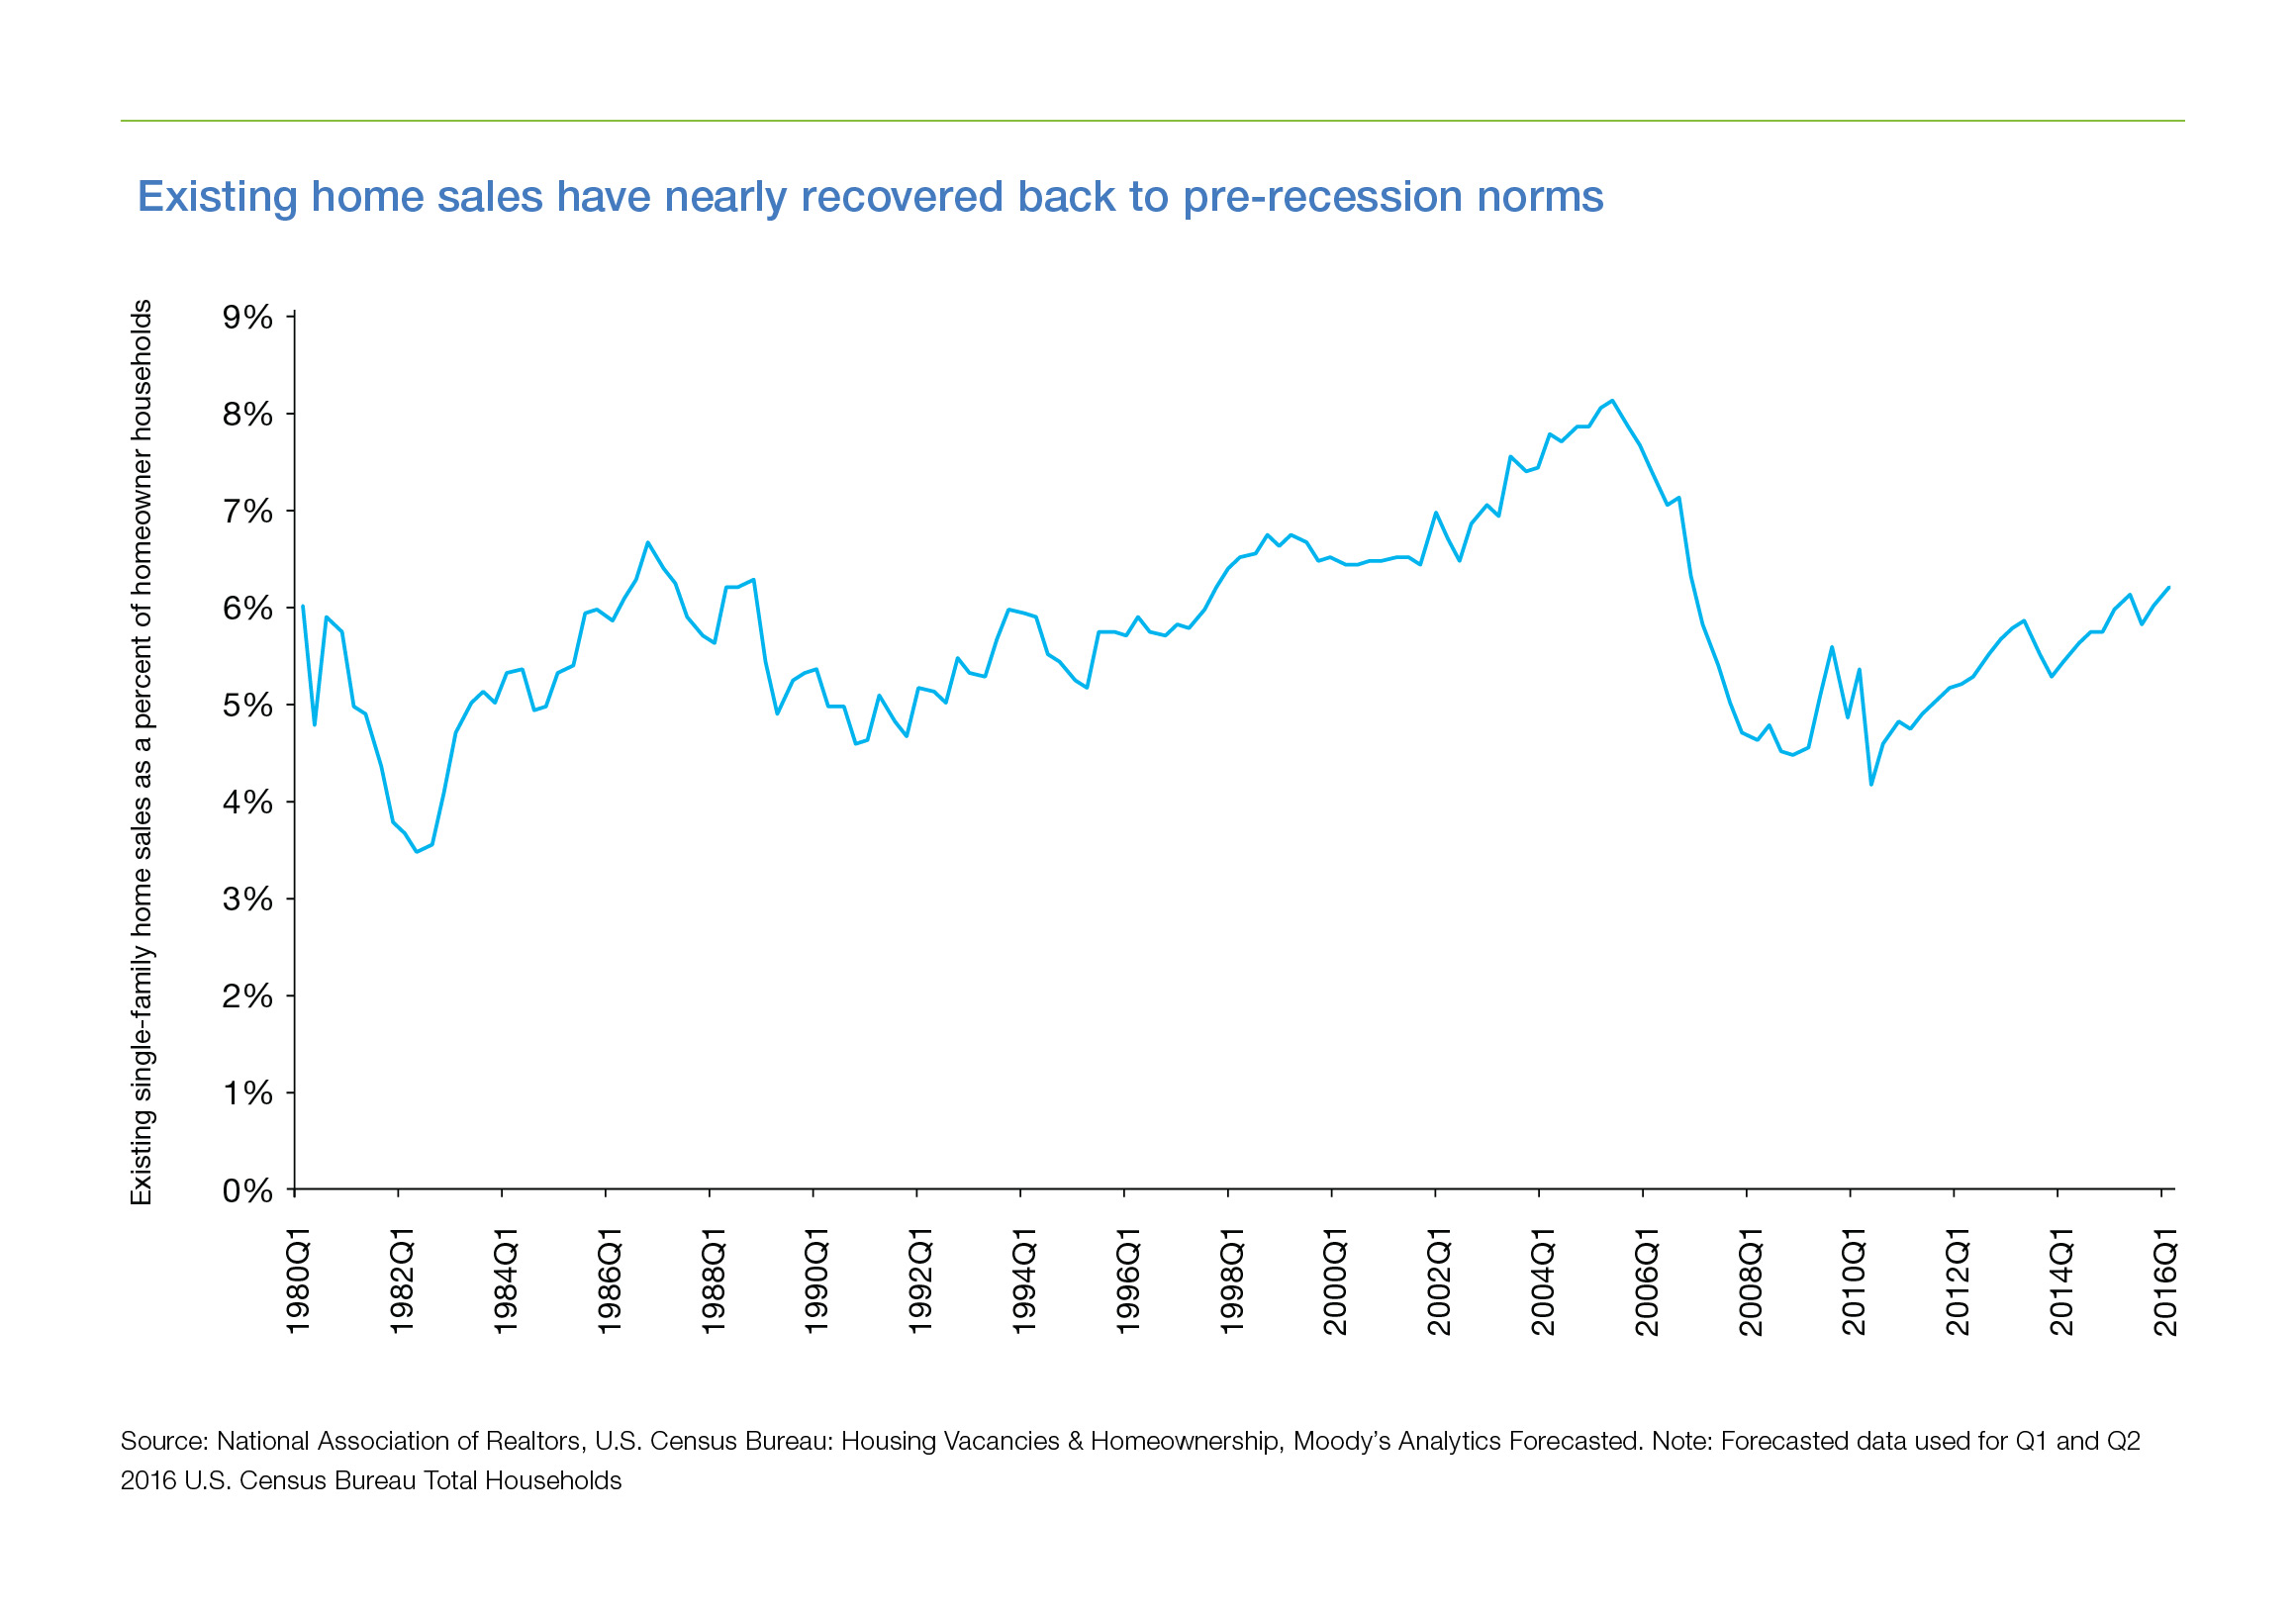 Existing home sales have nearly recovered back to pre-recession norms